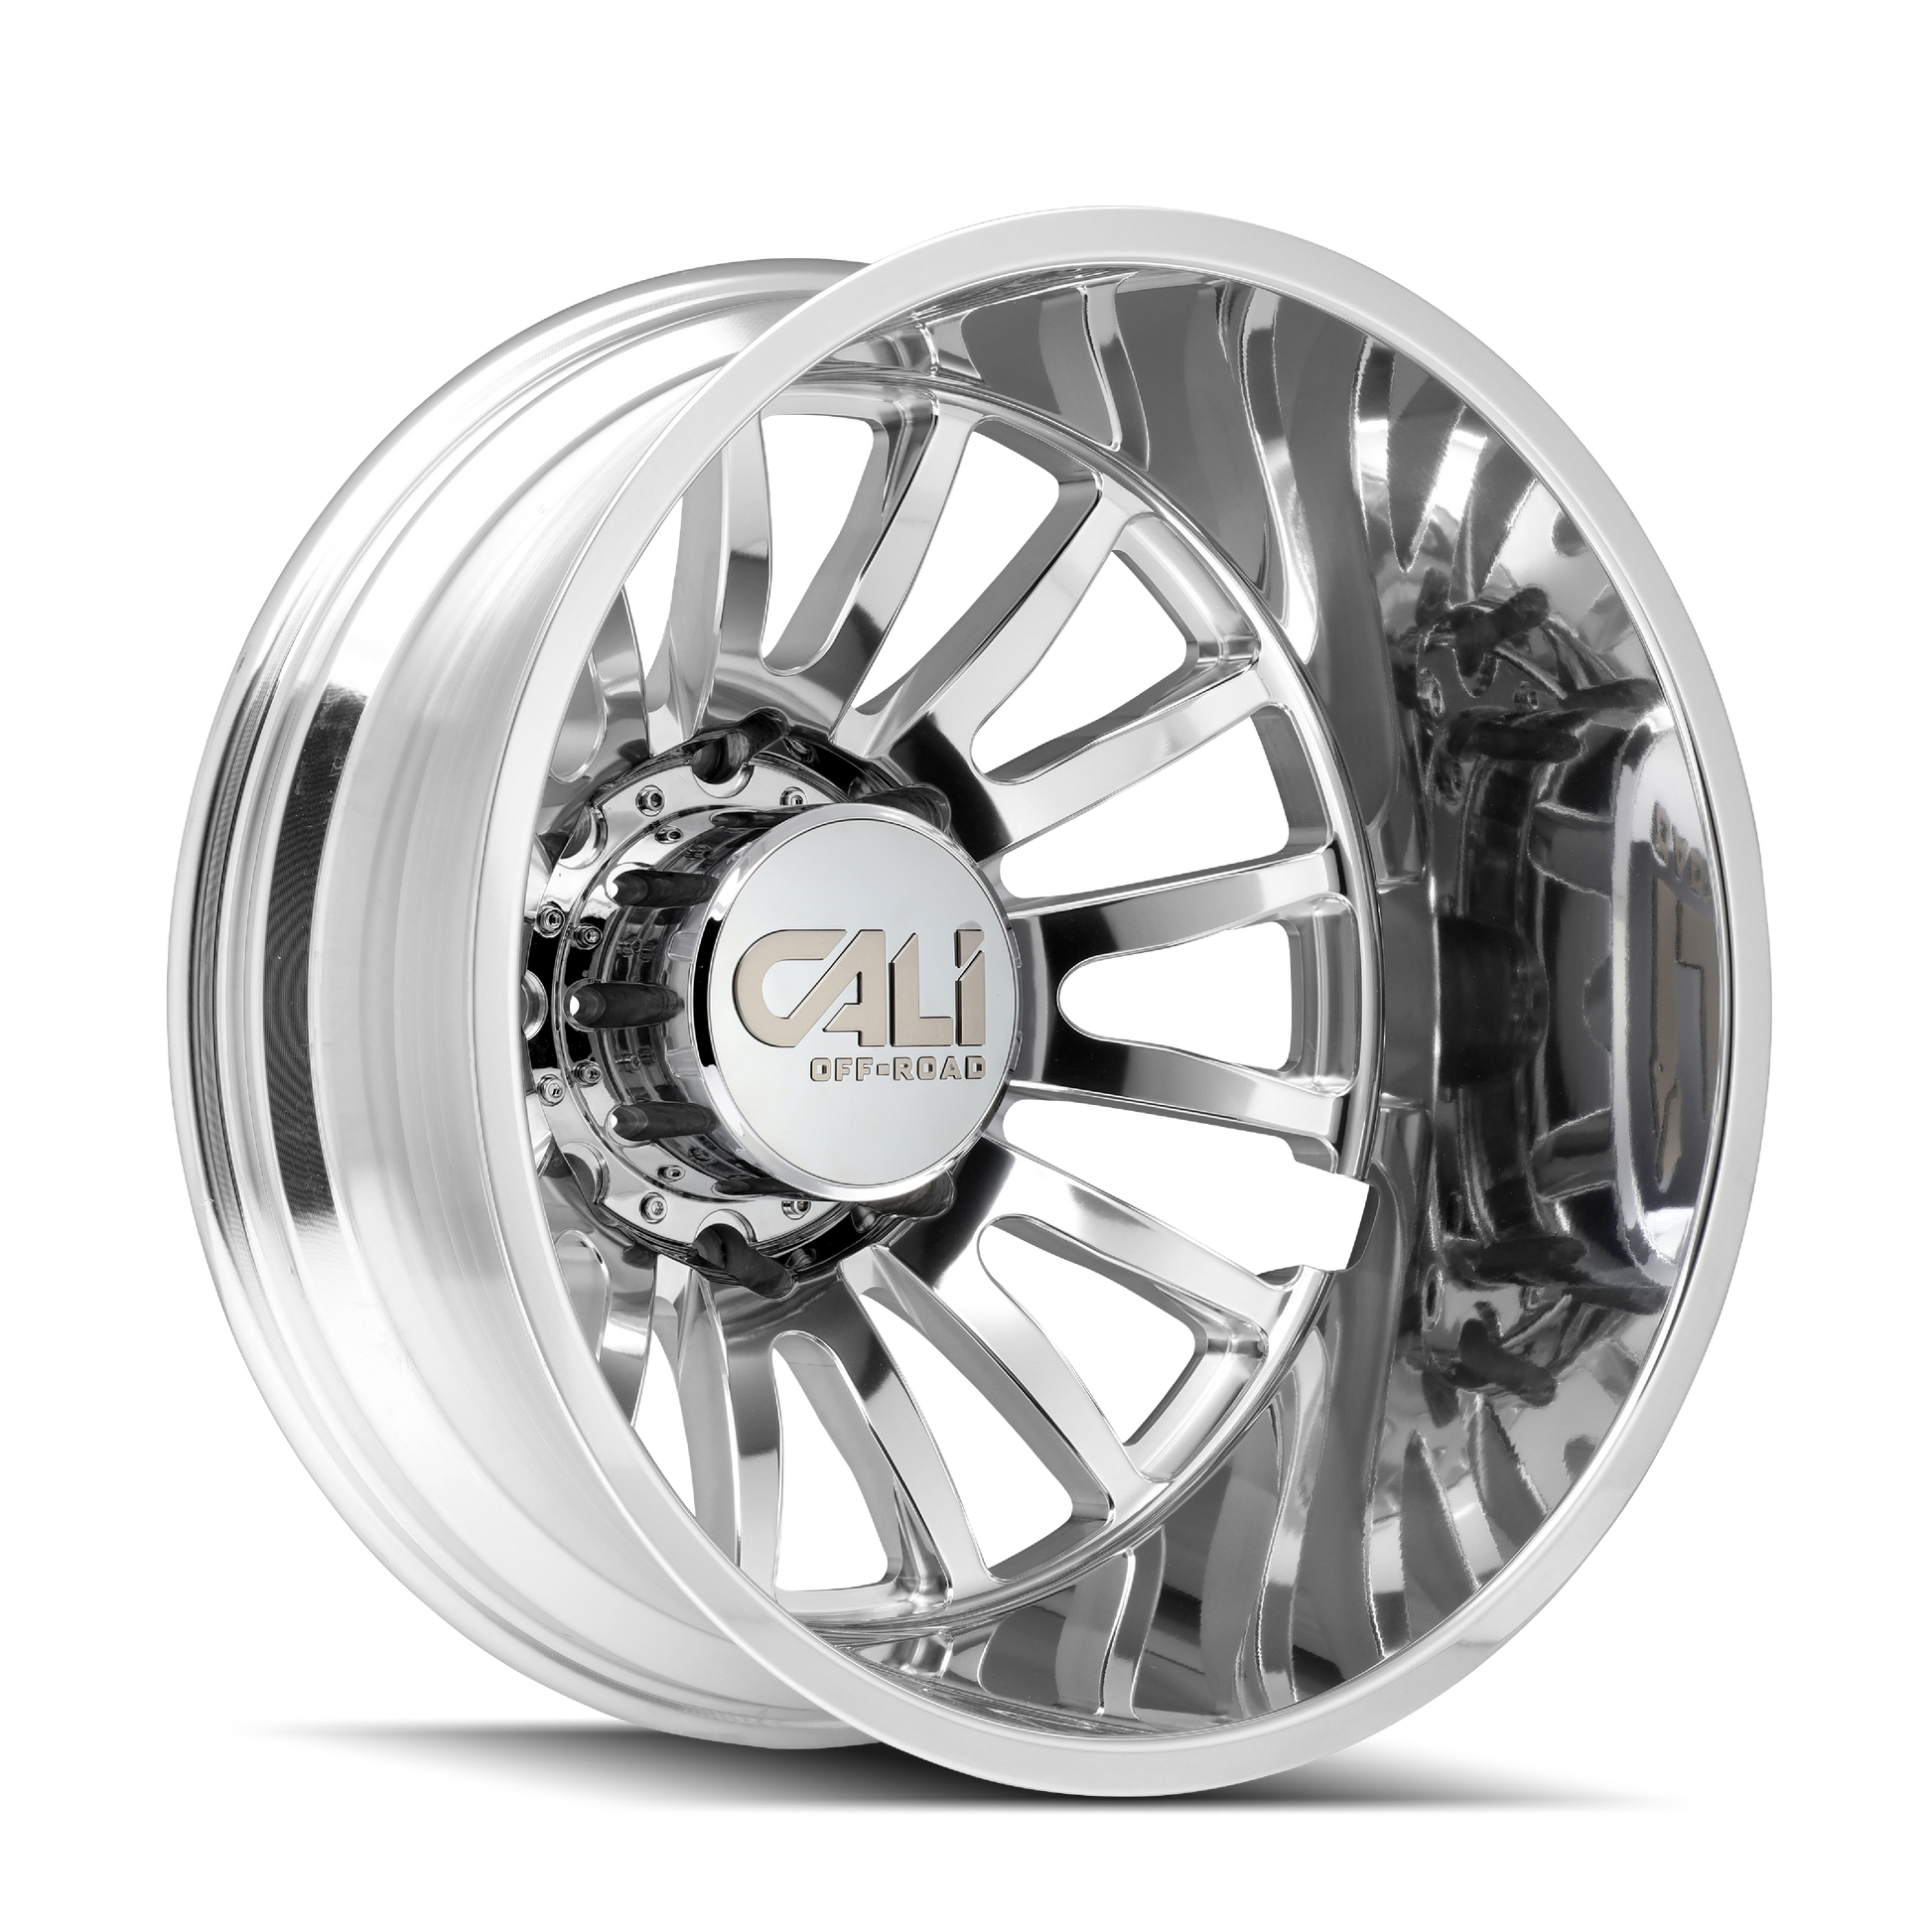 CALI OFF-ROAD SUMMIT DUALLY Wheels Polished/Milled Spokes